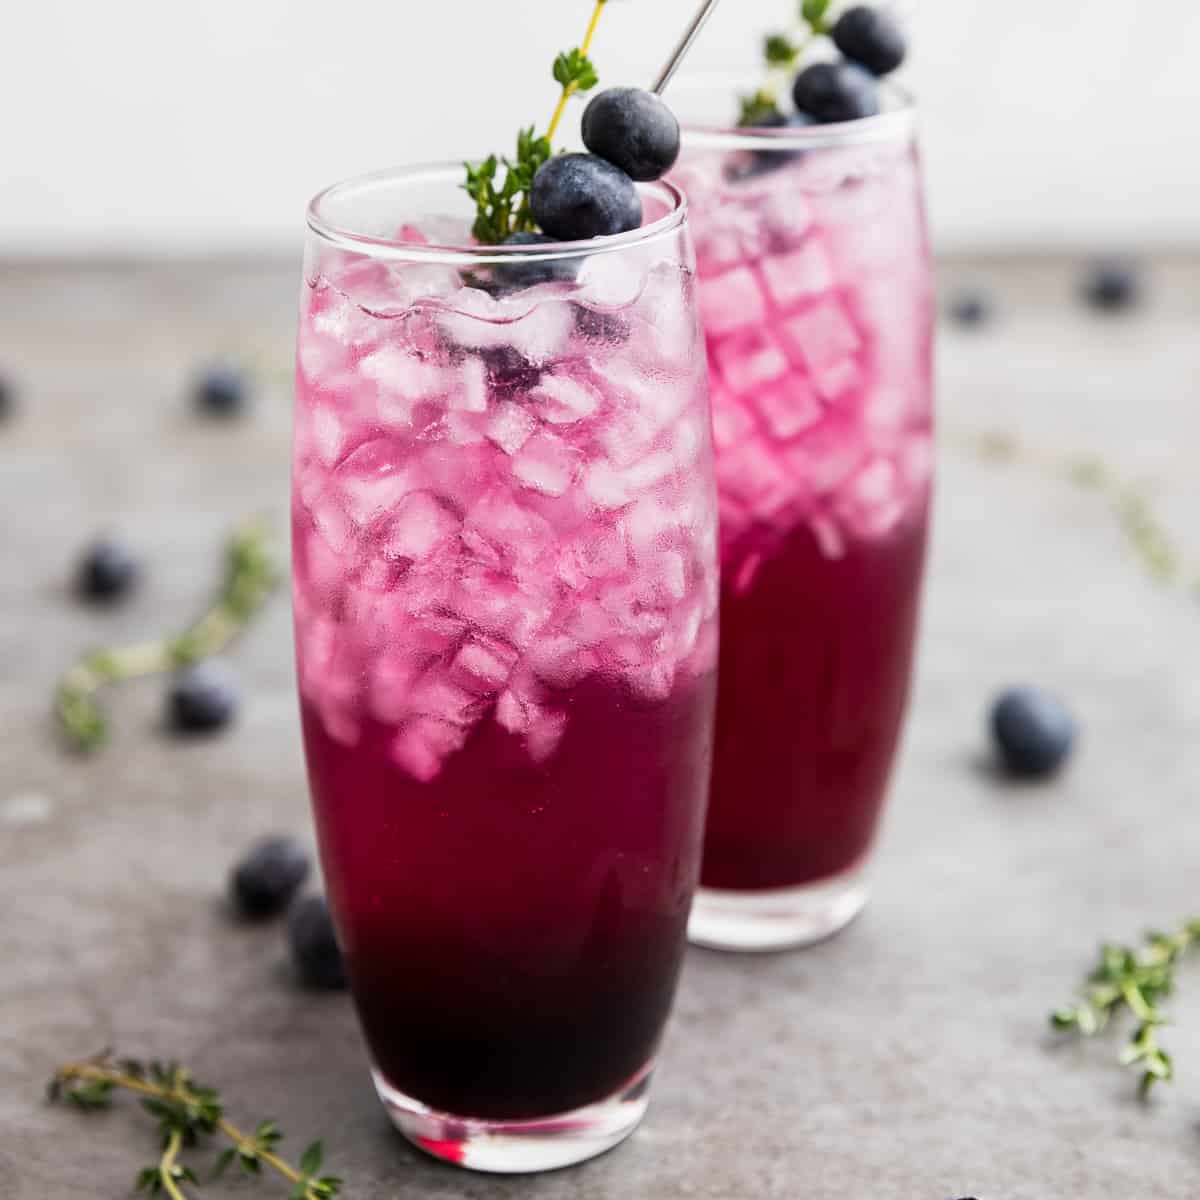 Blueberry gin cocktail